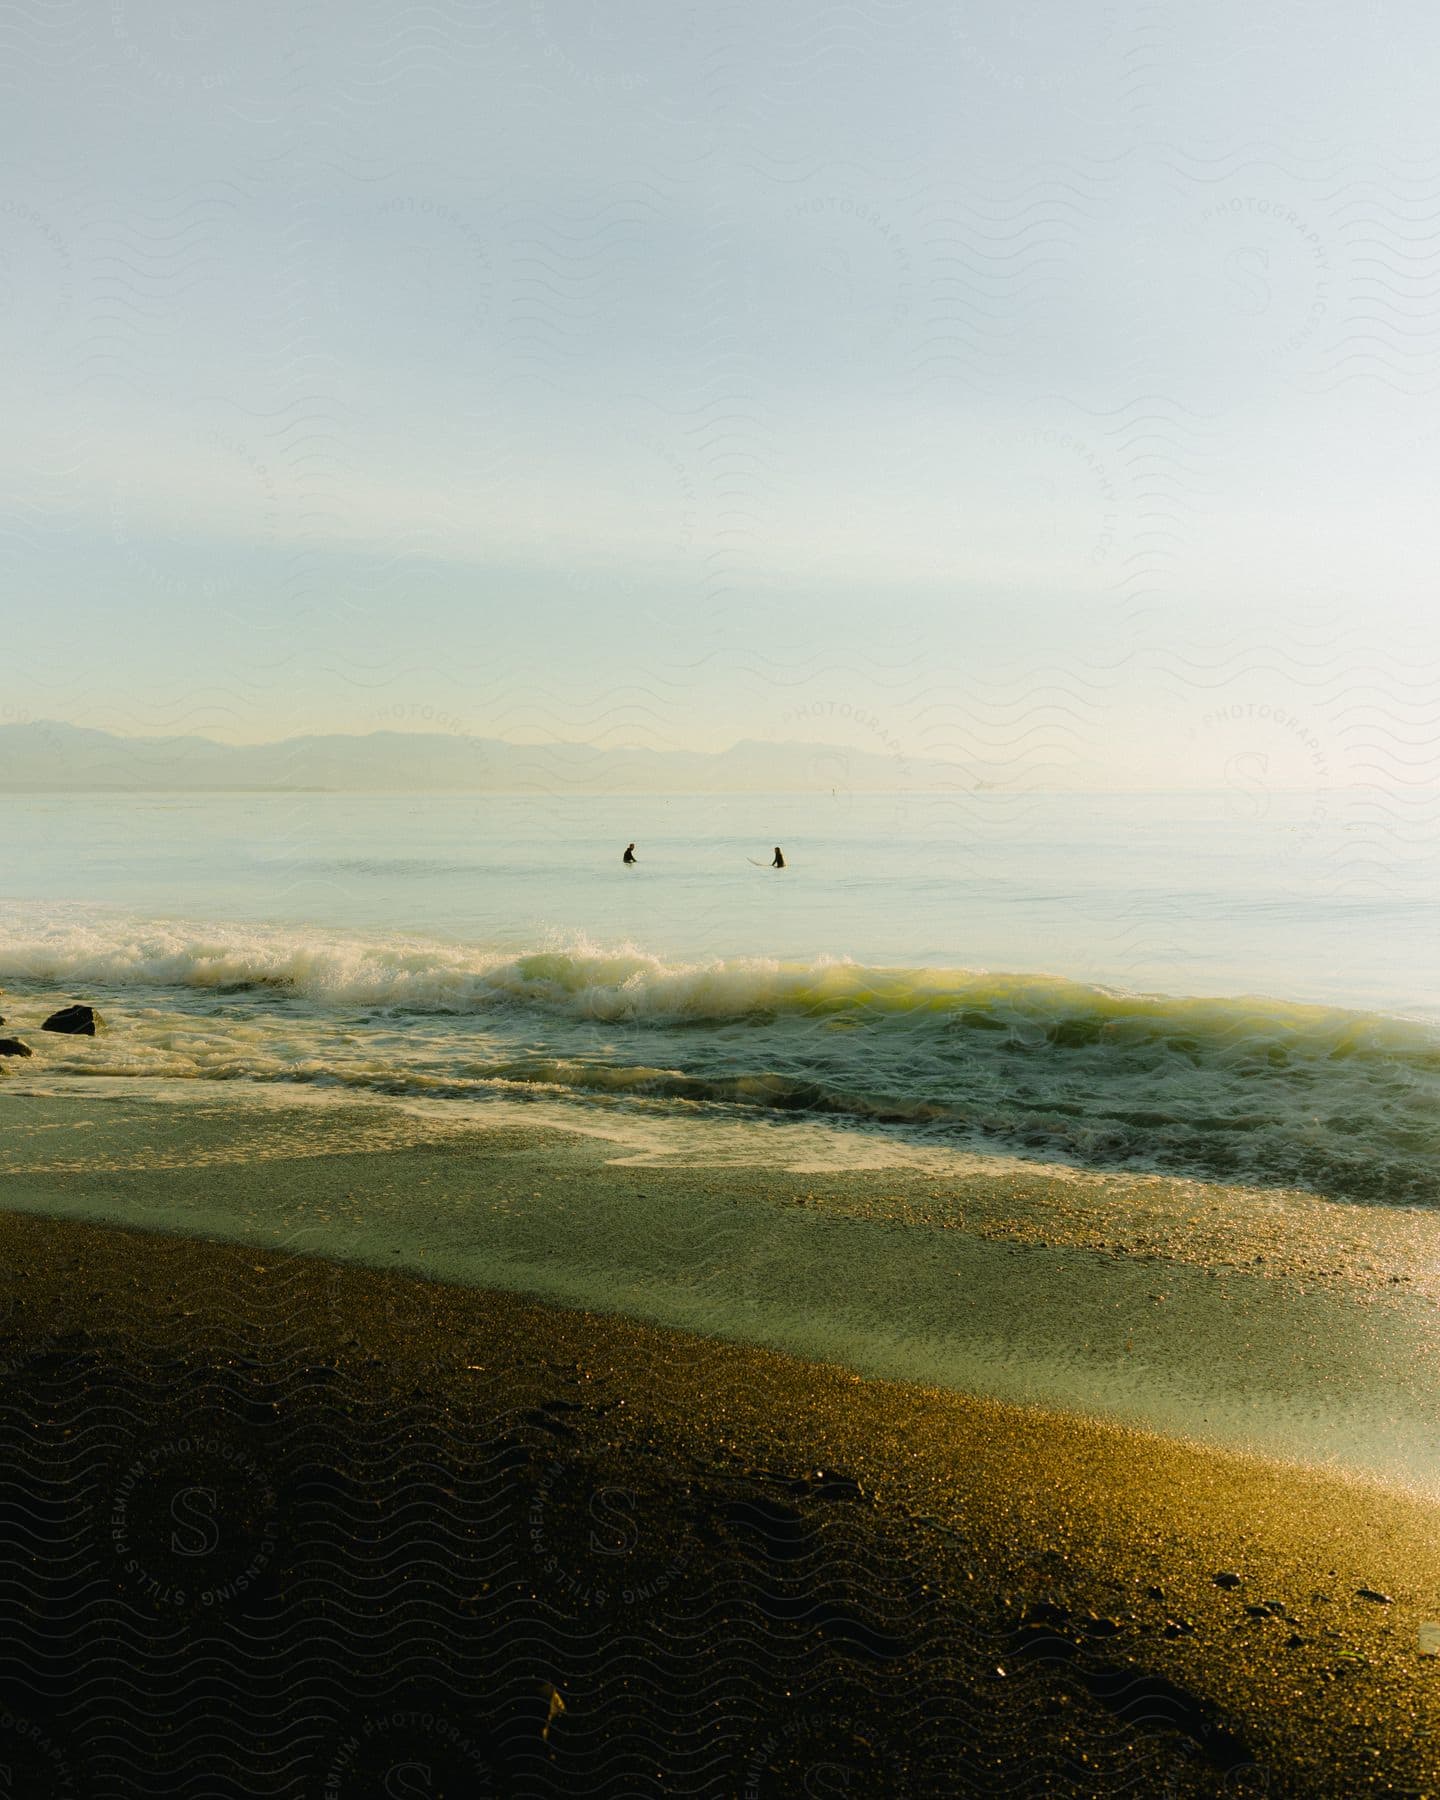 Waves roll into shore as two people are out in the water under a hazy sky